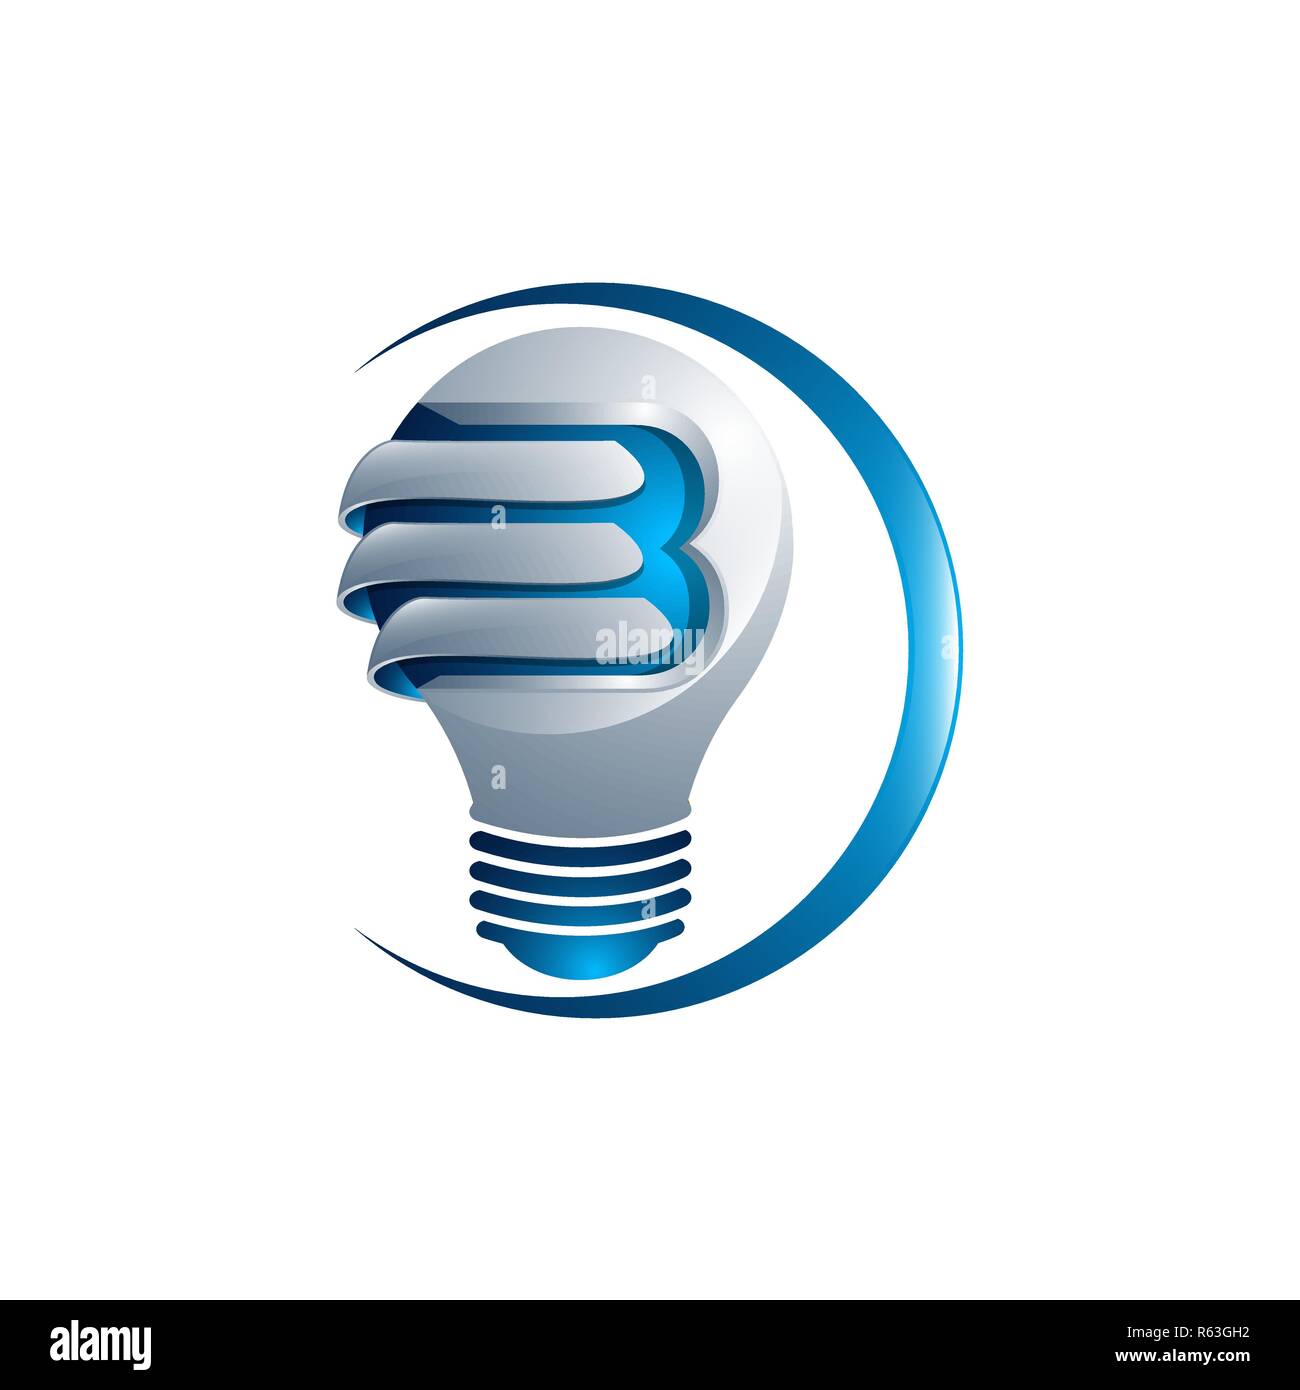 Abstract light bulb logo design made of color pieces - various geometric shapes Stock Vector